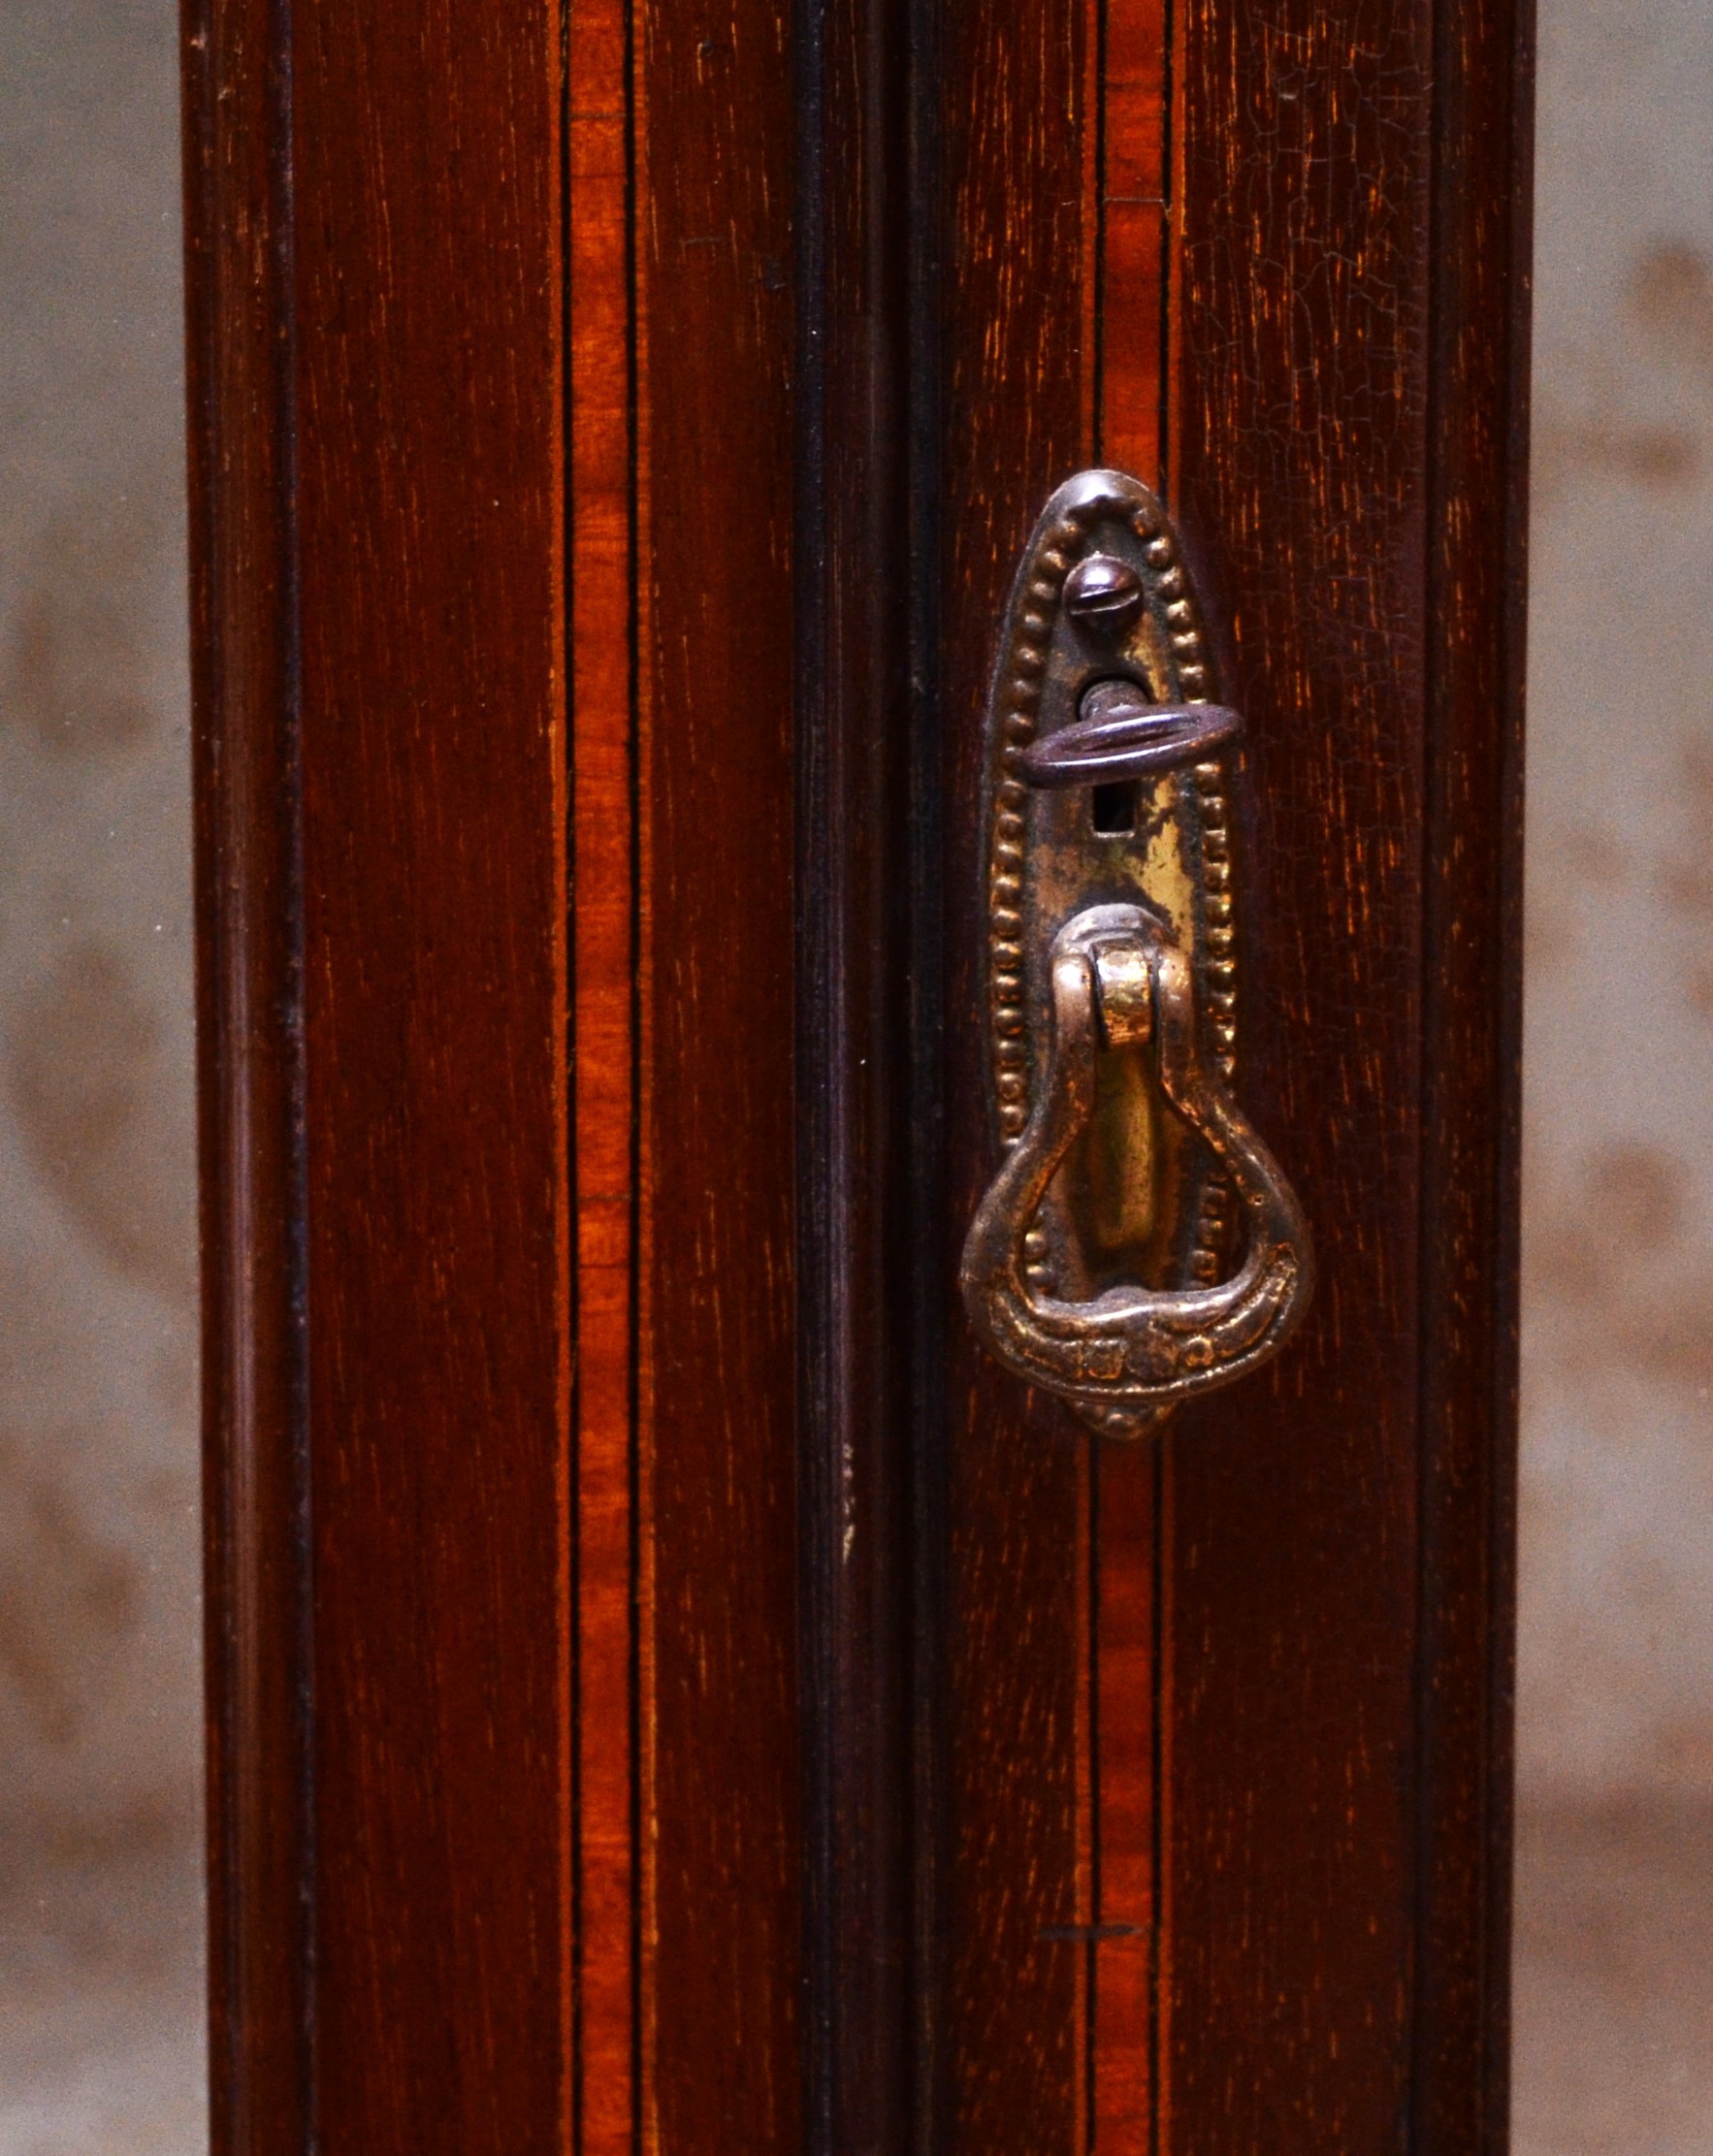 Edwardian inlaid mahogany display cabinet, the central arched mirror plate within a carved scroll - Image 3 of 5